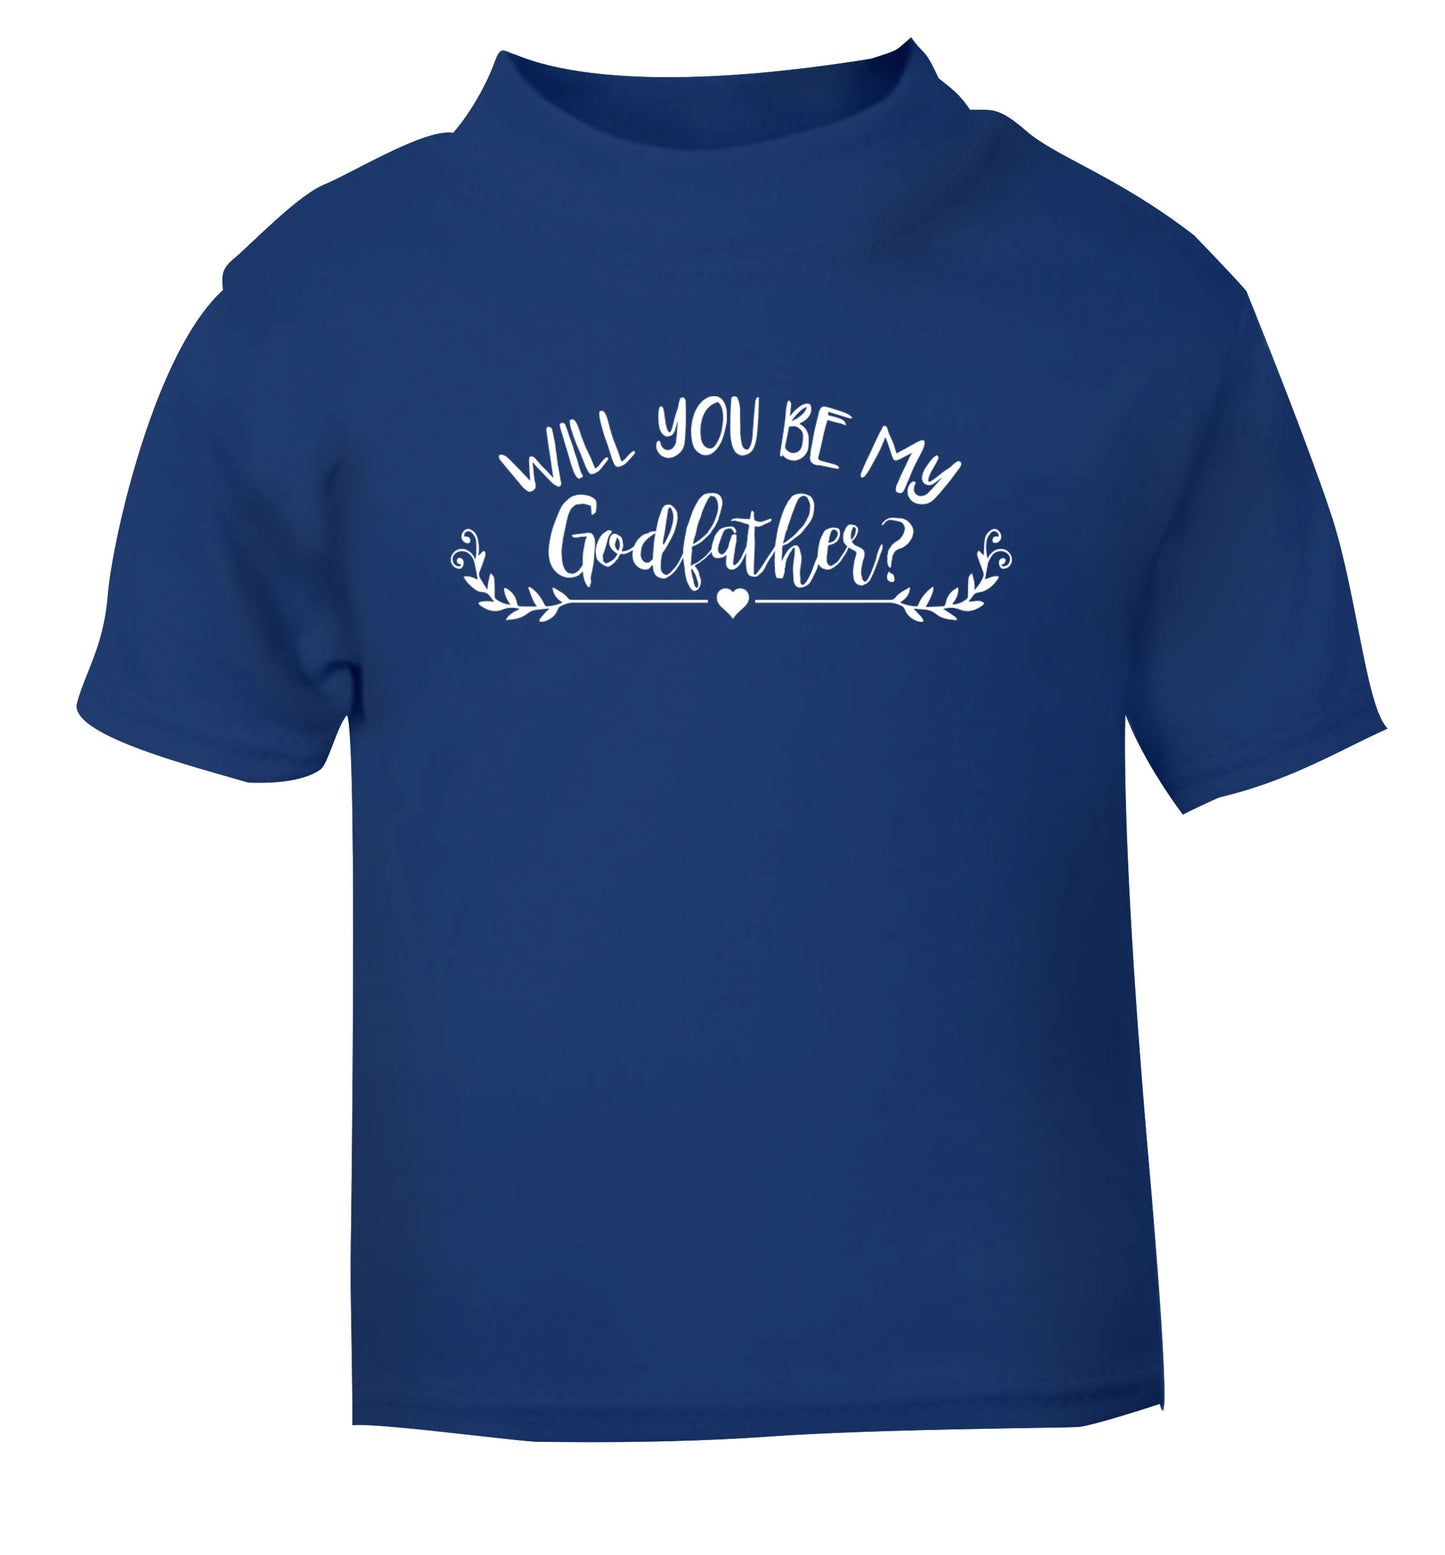 Will you be my godfather? blue Baby Toddler Tshirt 2 Years